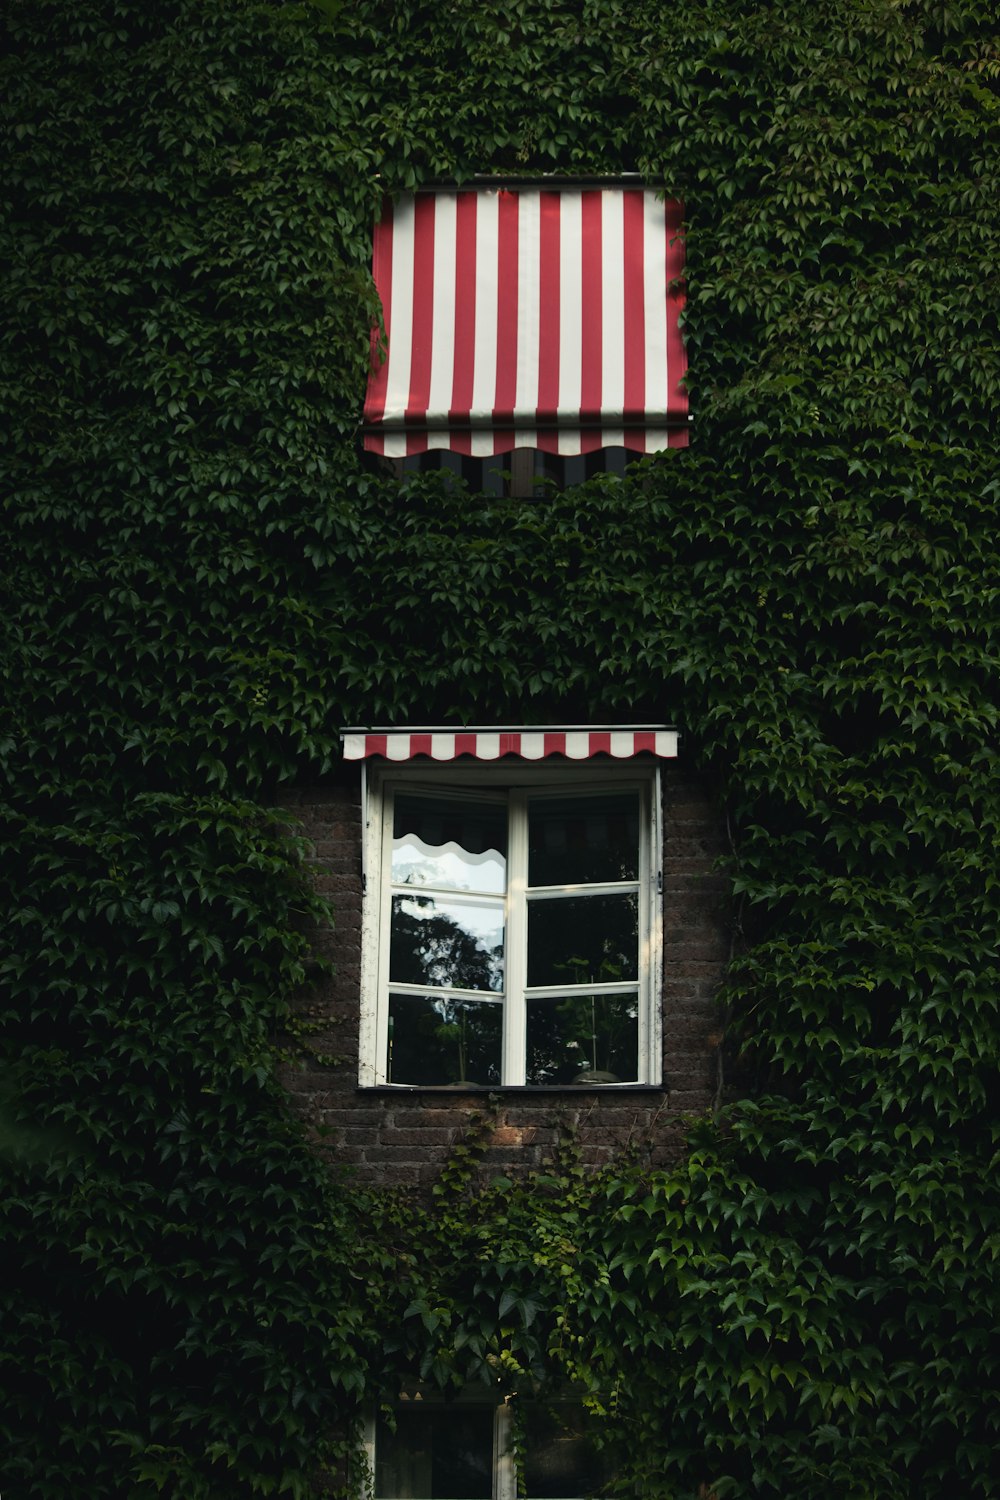 a red and white striped awning over a window